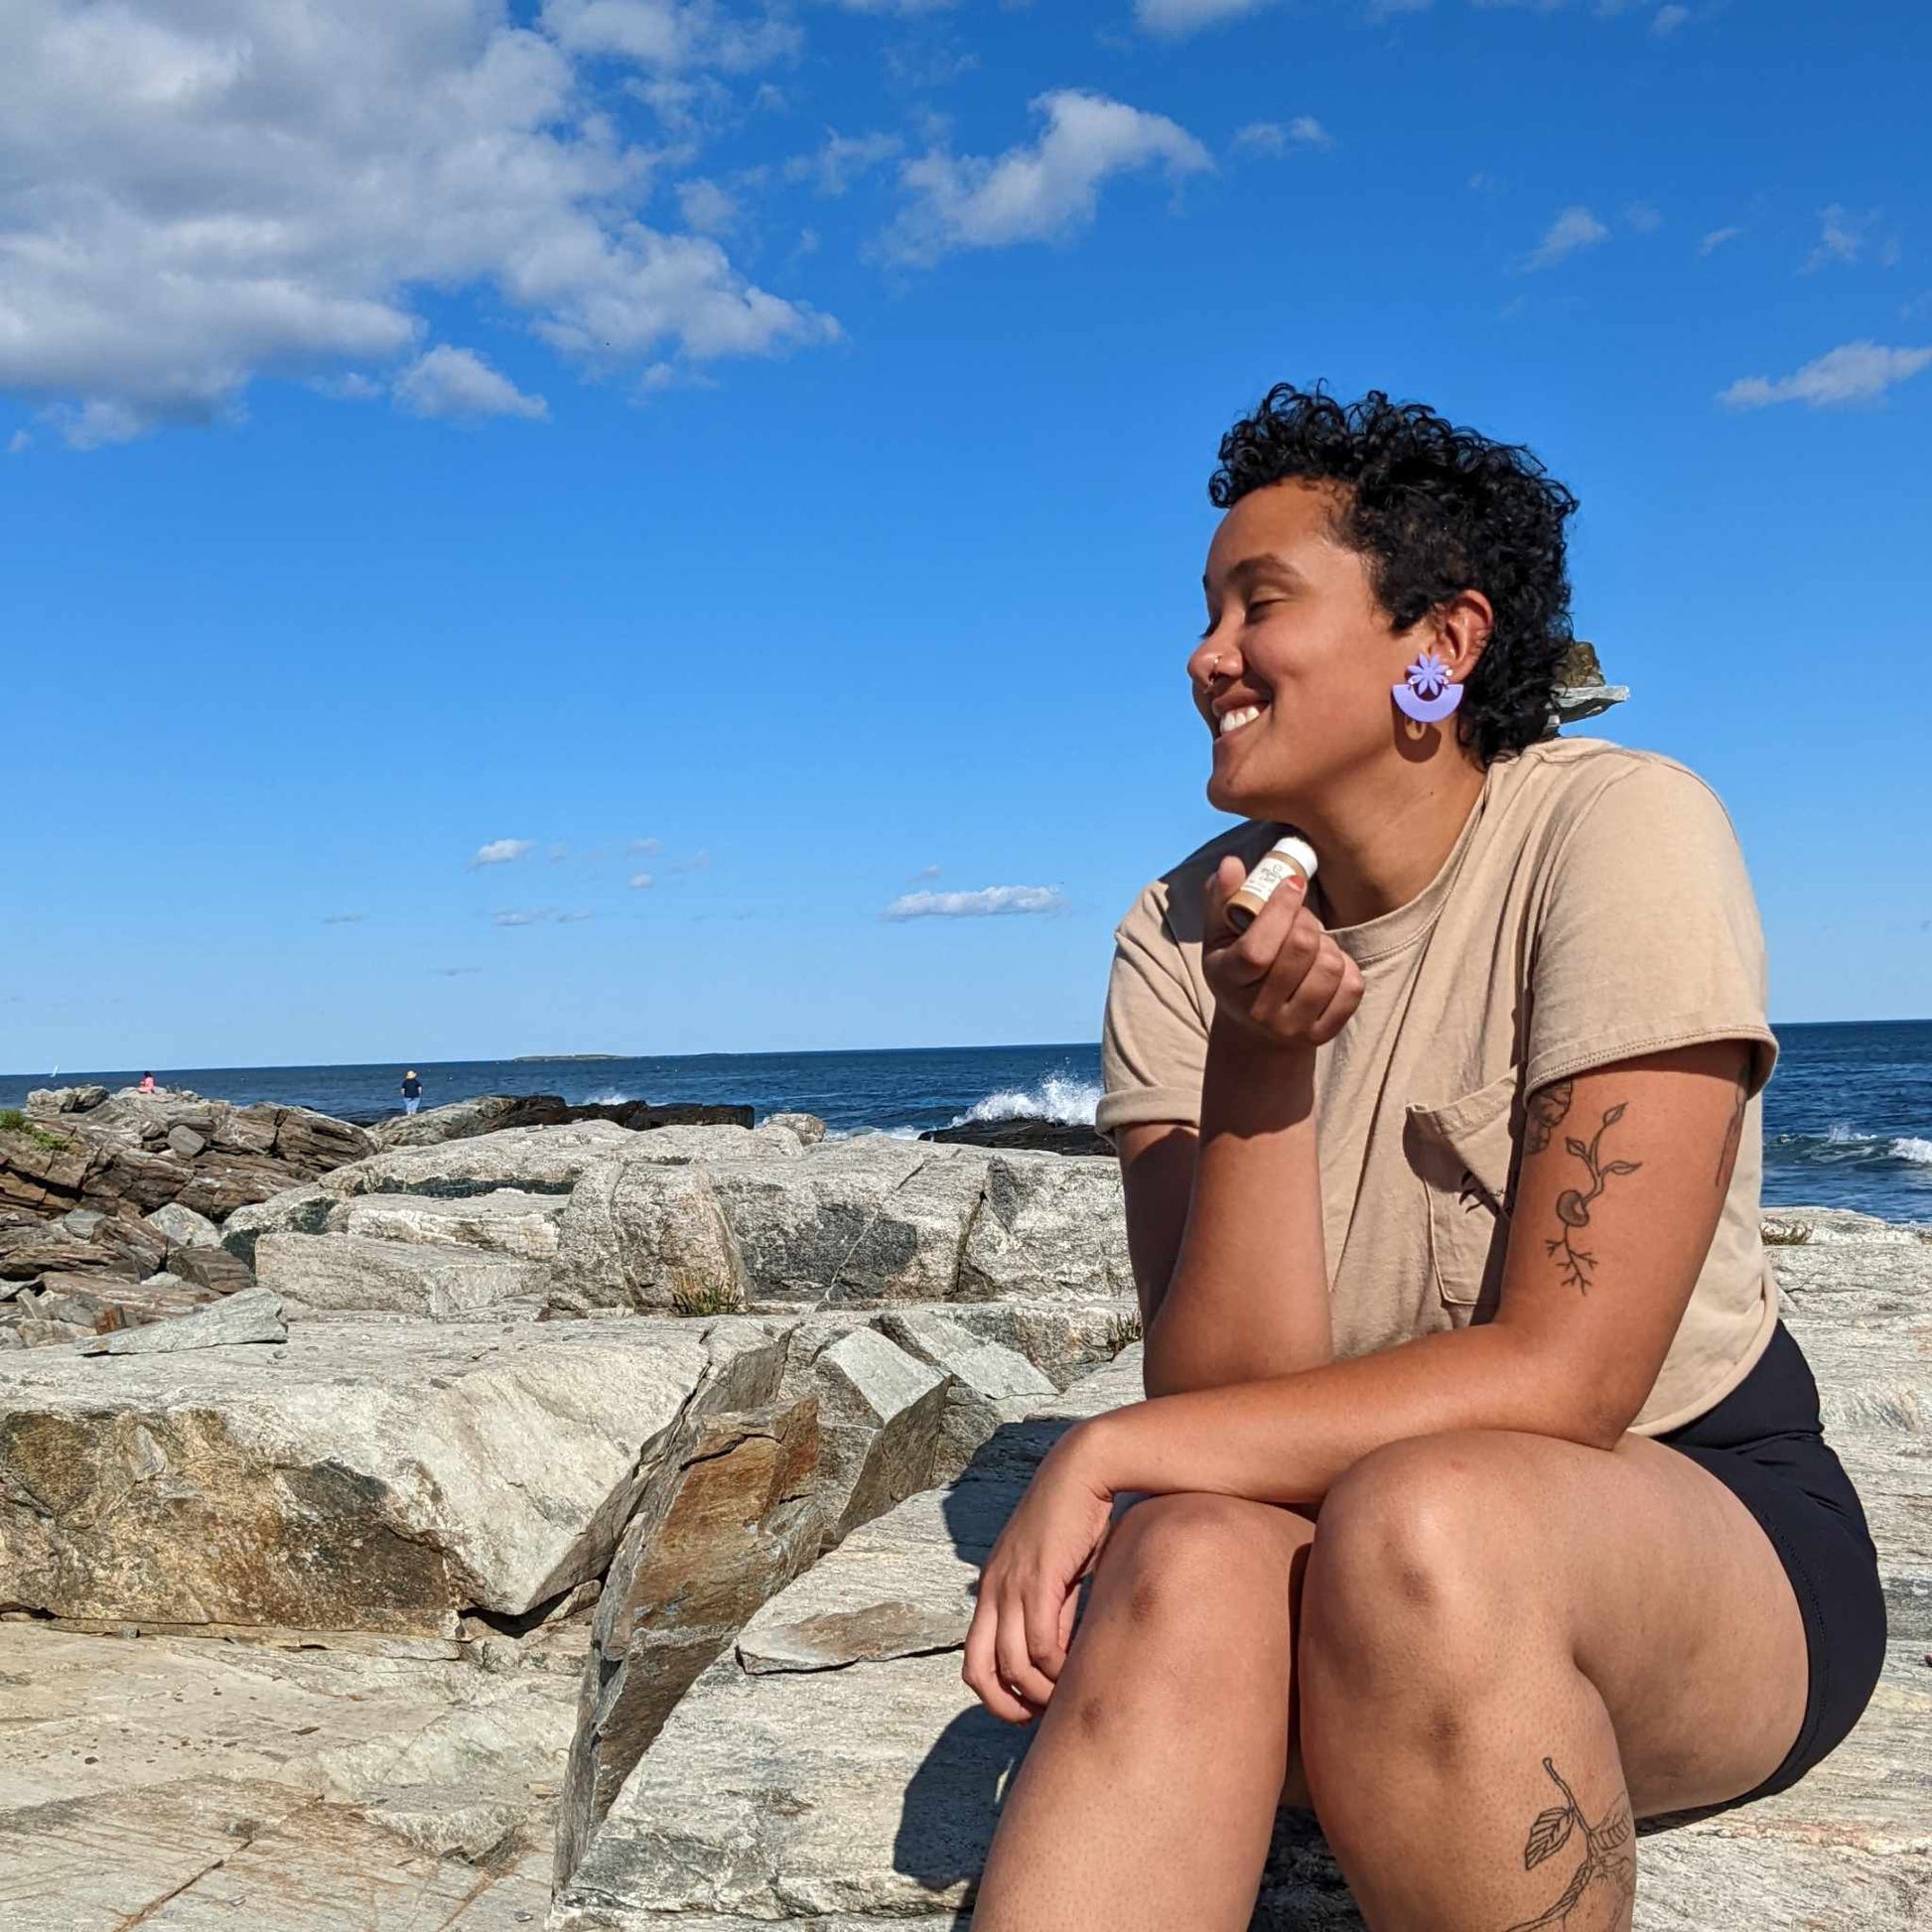 Smiling woman by the ocean holding a cbd lip balm